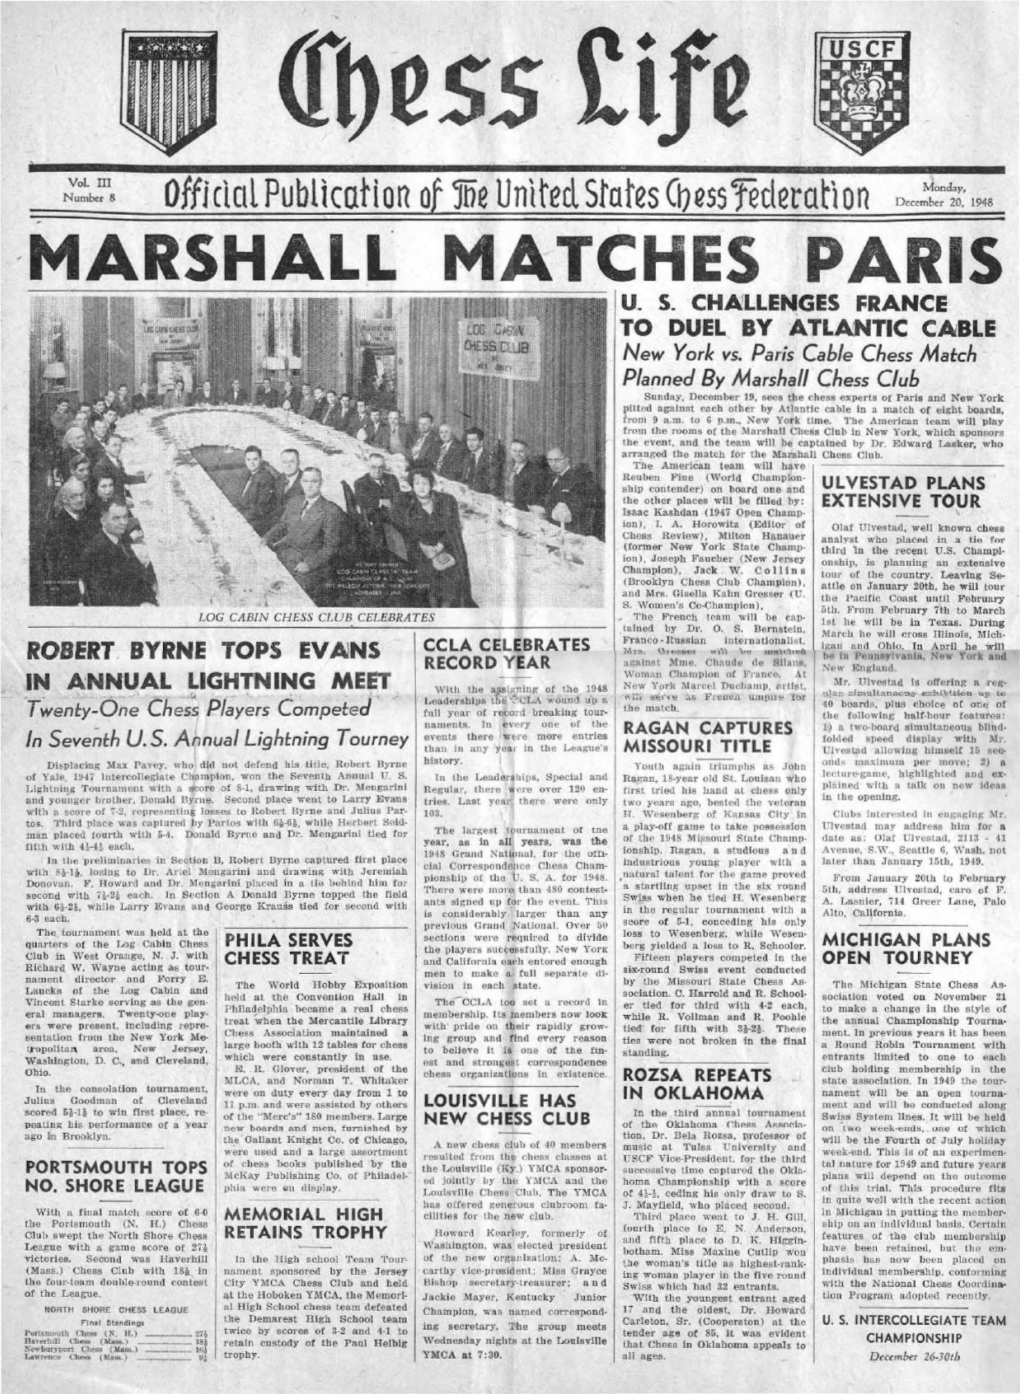 MARSHALL MATCHES PARIS CHAILLEN,GES FRANCE DUEL by a TLA!NTIC Caible New York Vs